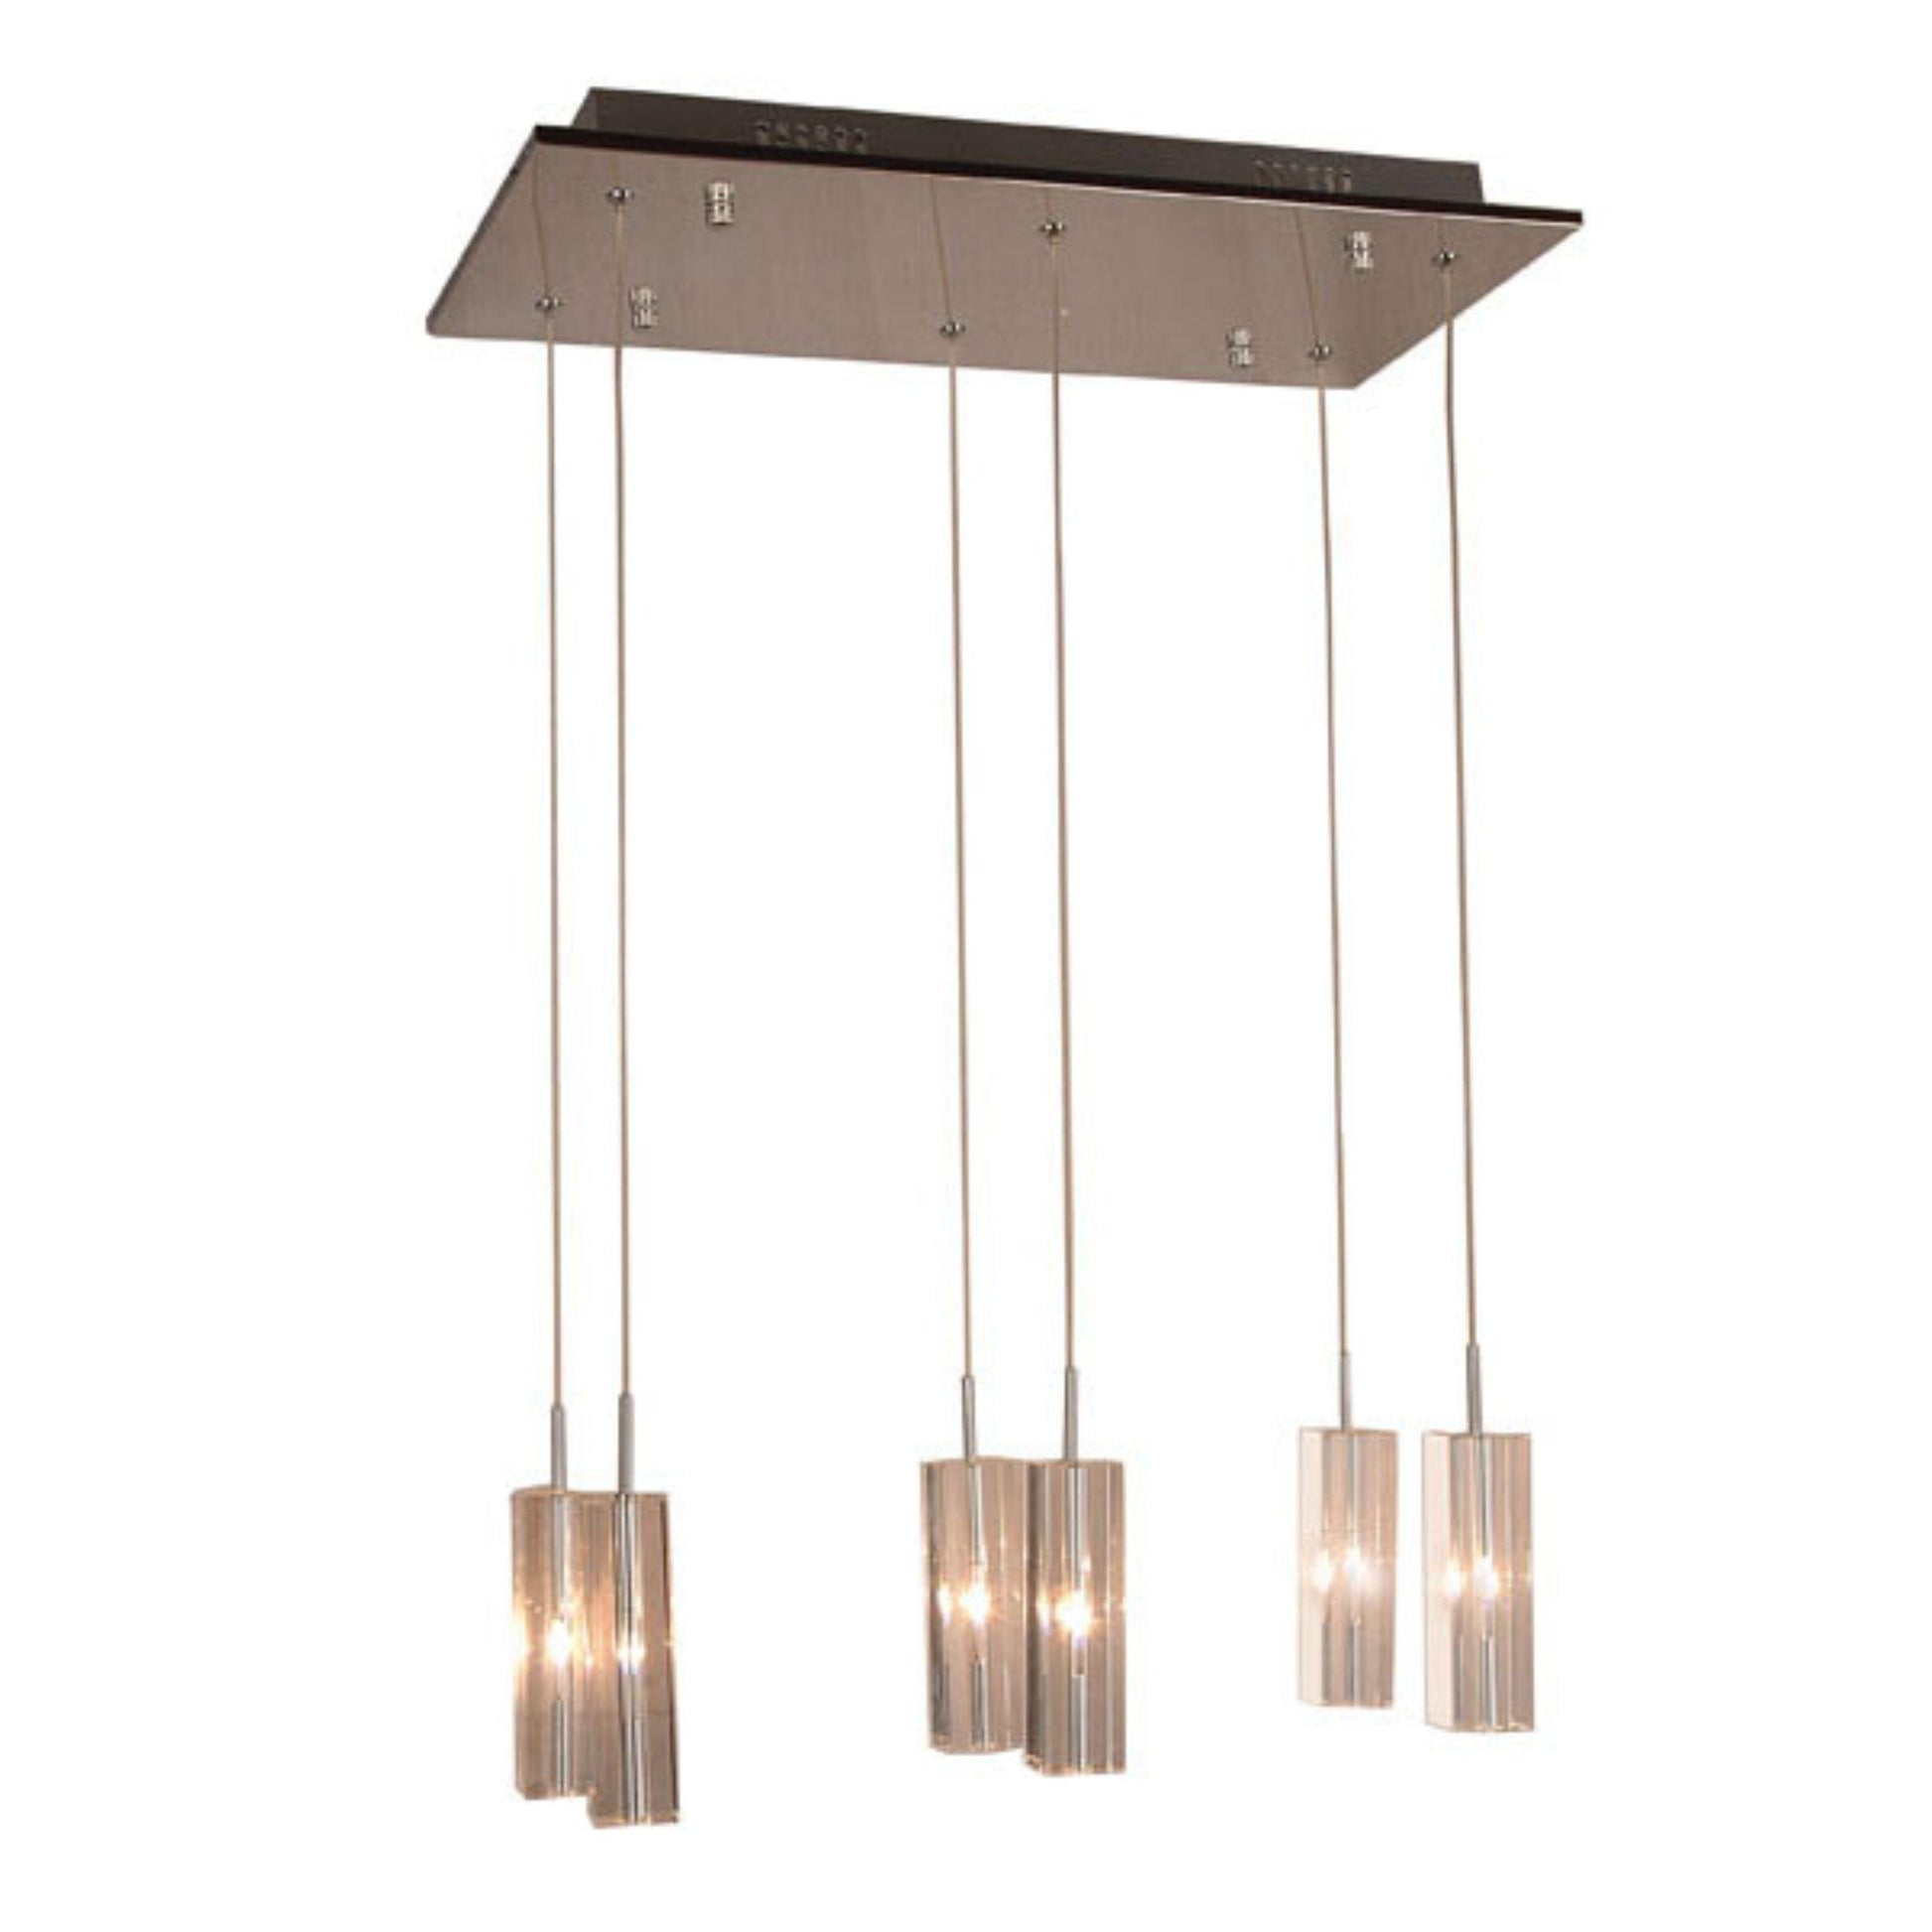 CUBO 6 Light Clear Crystal Low Voltage Pendant - V&M IMPORTS Australia